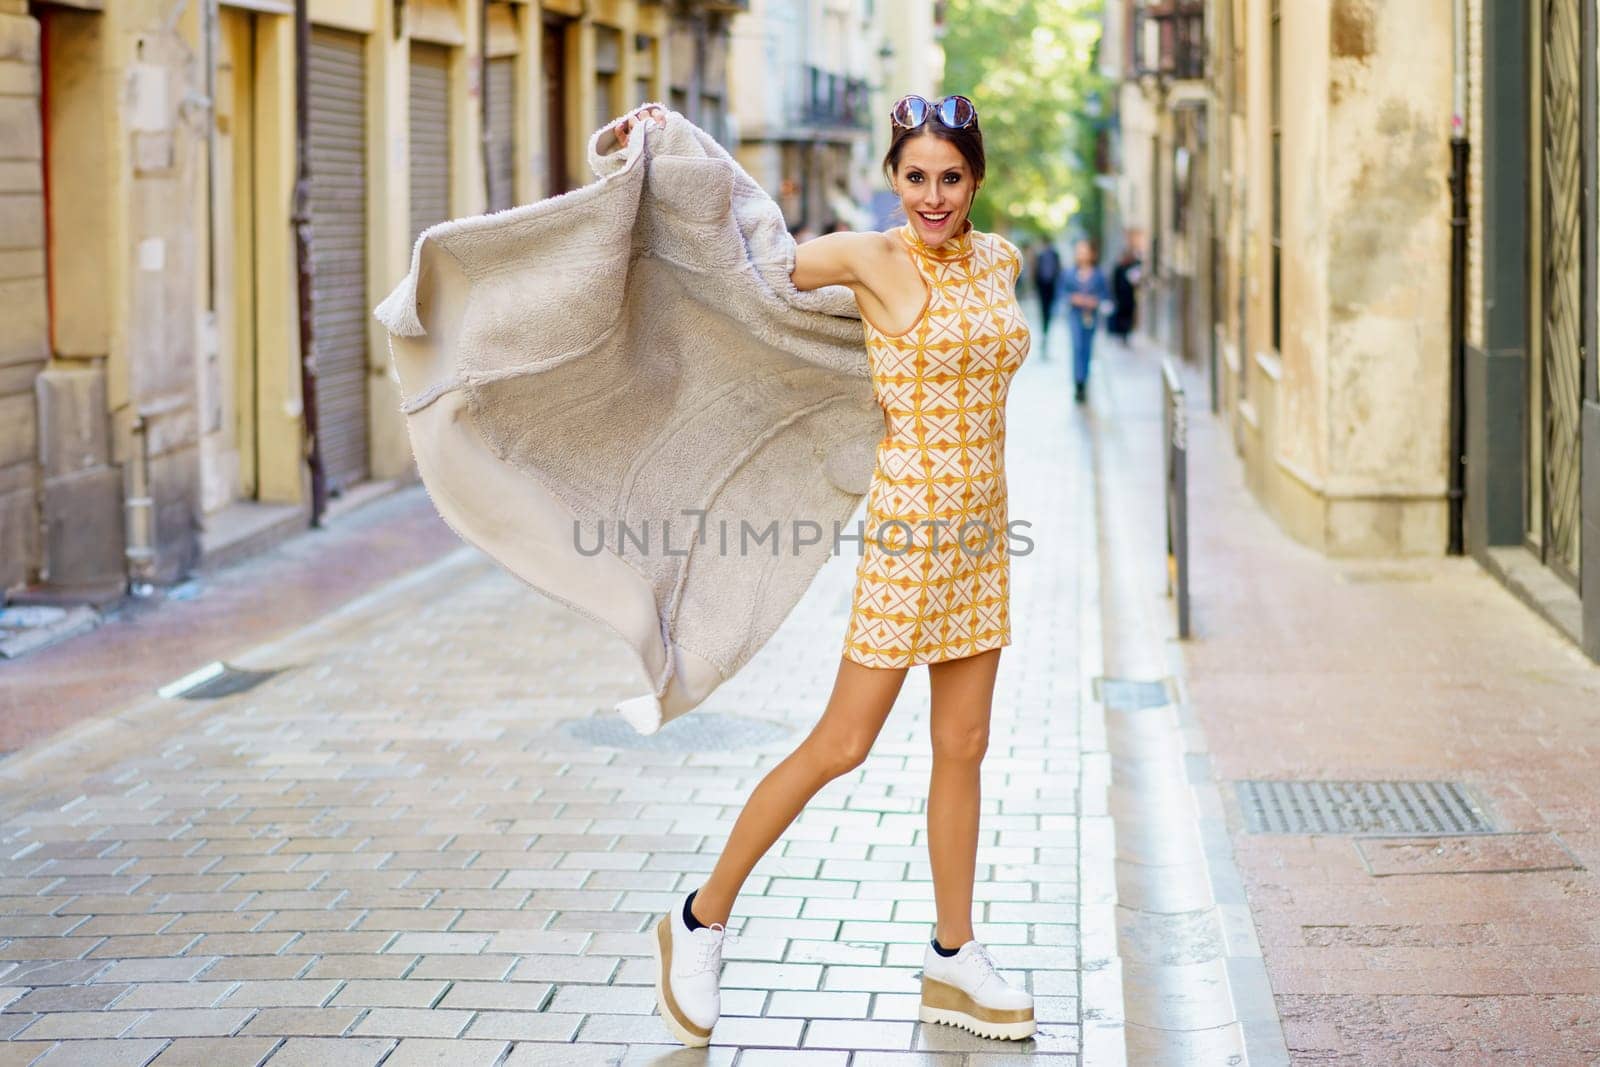 Cheerful young stylish female wearing dress and sneakers with sunglasses standing on paved street against blurred buildings and holding long coat in hands